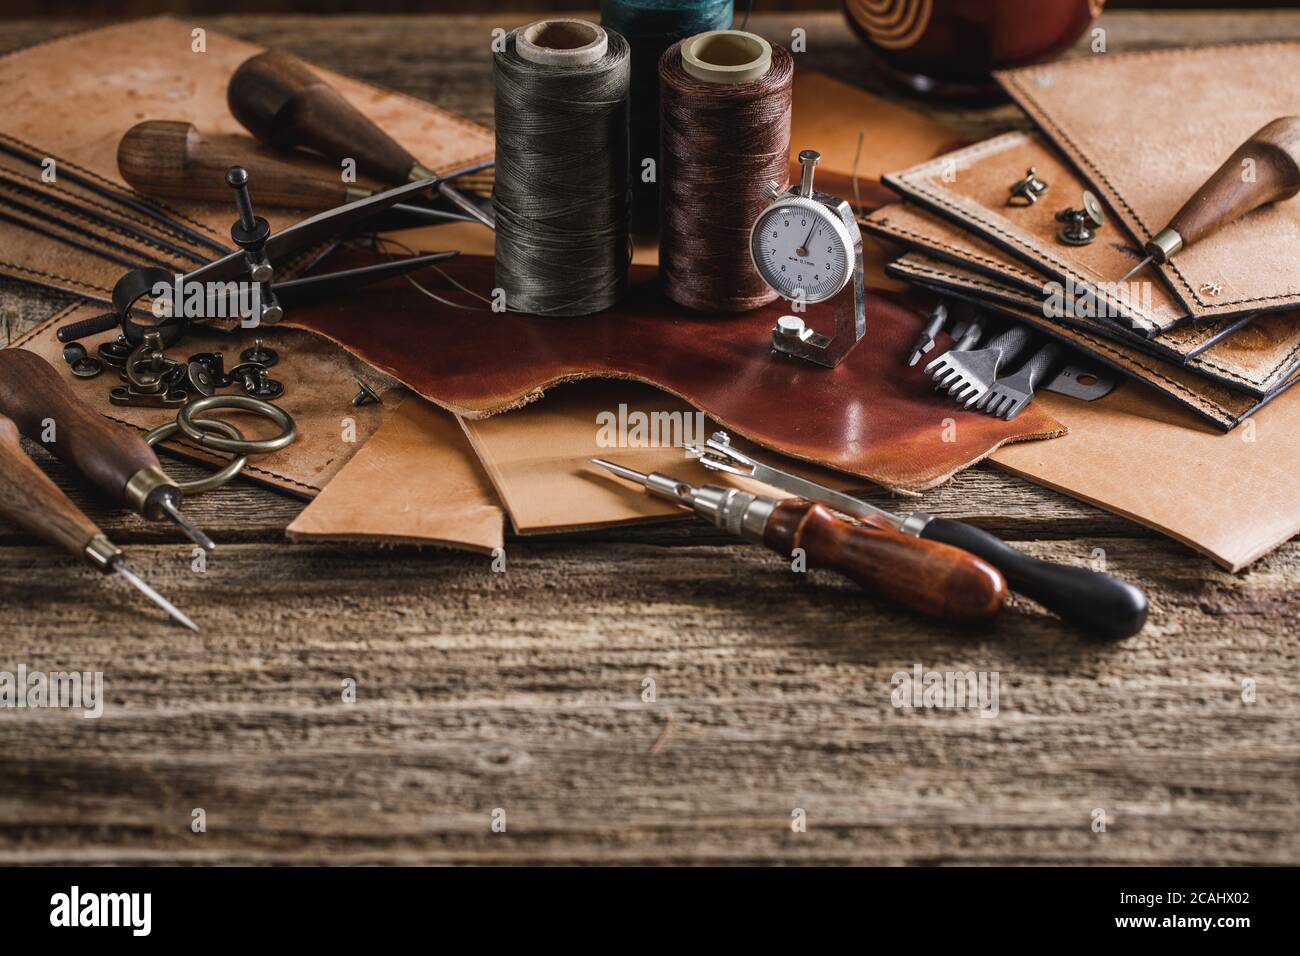 Leather Craft Tools On Cutting Mat Stock Photo 1511887040